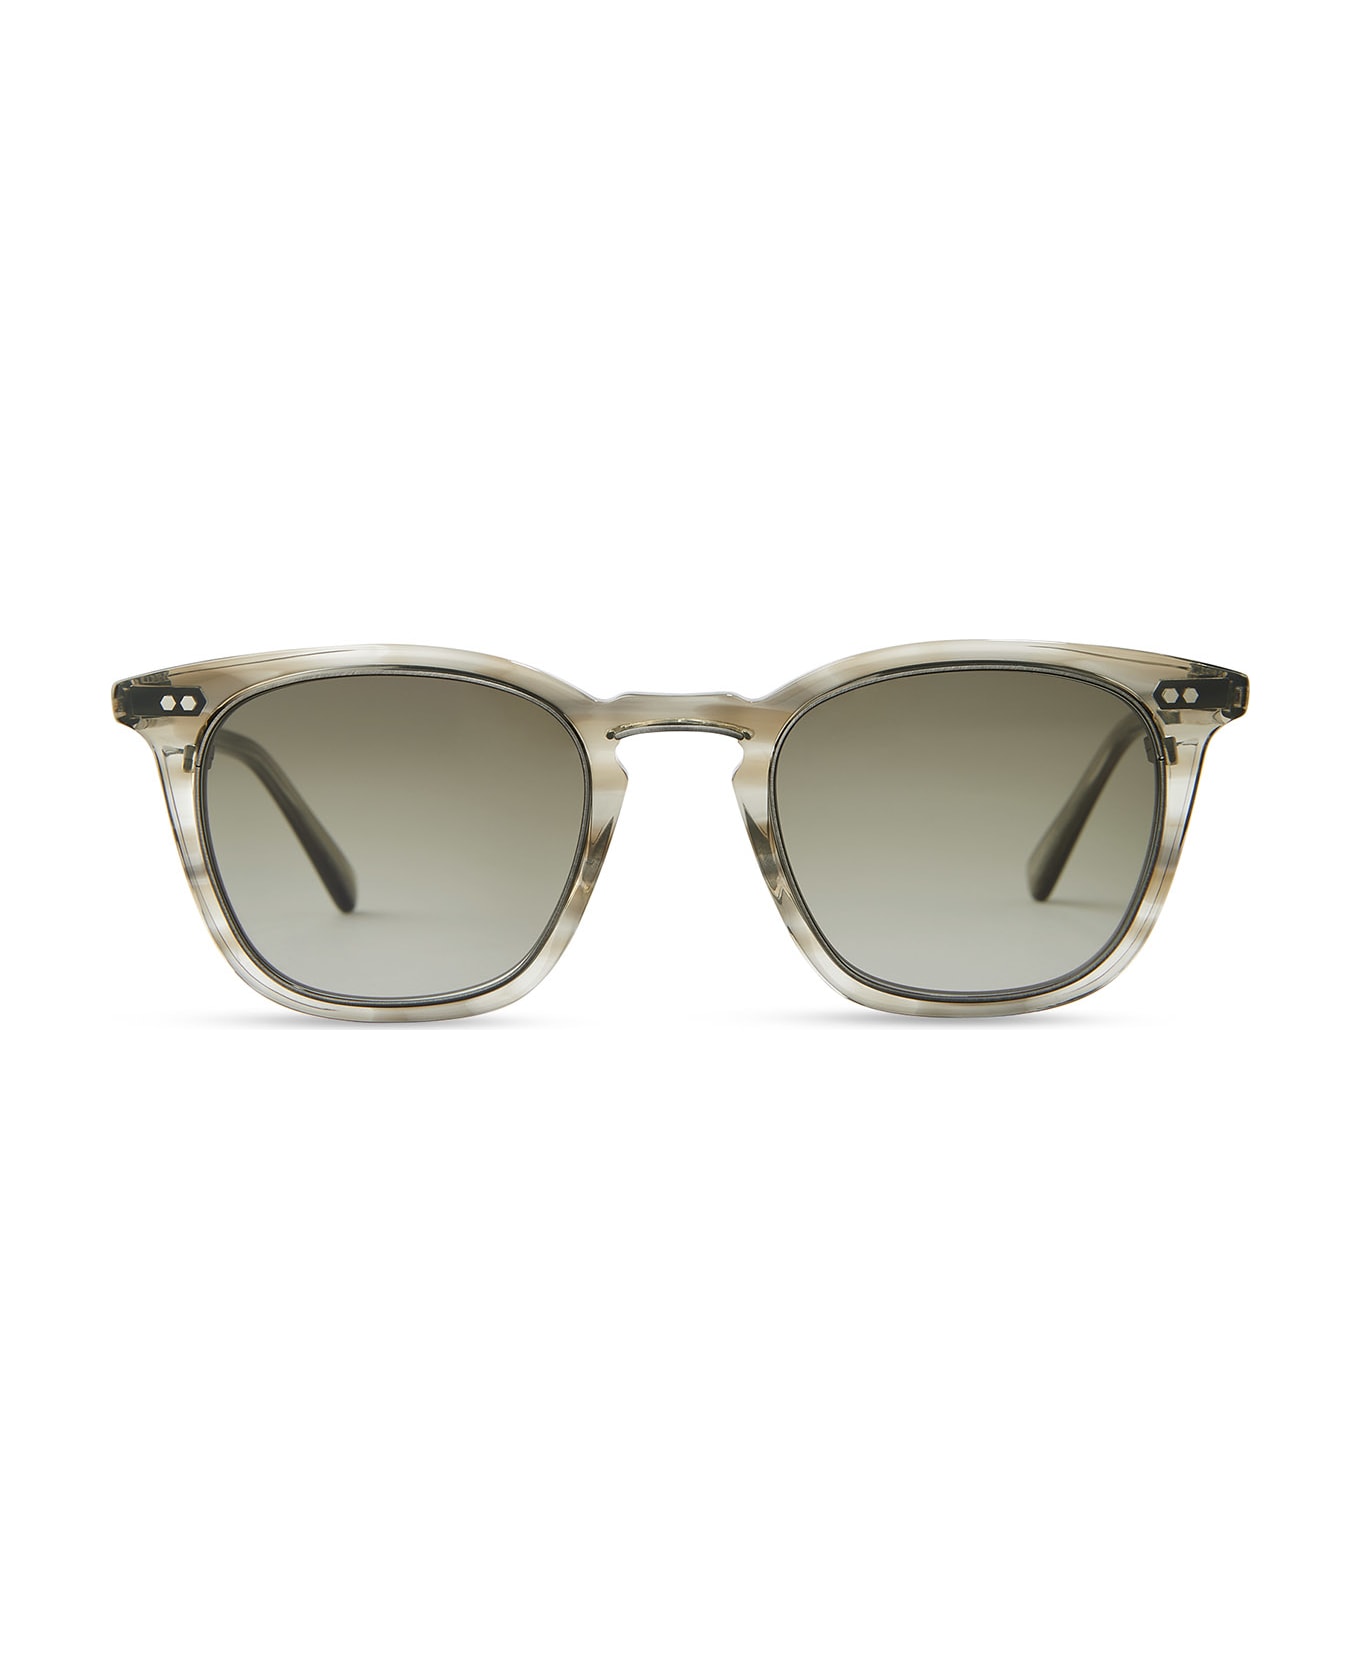 Mr. Leight Getty Ii S Celestial Grey-pewter Sunglasses -  Celestial Grey-Pewter サングラス